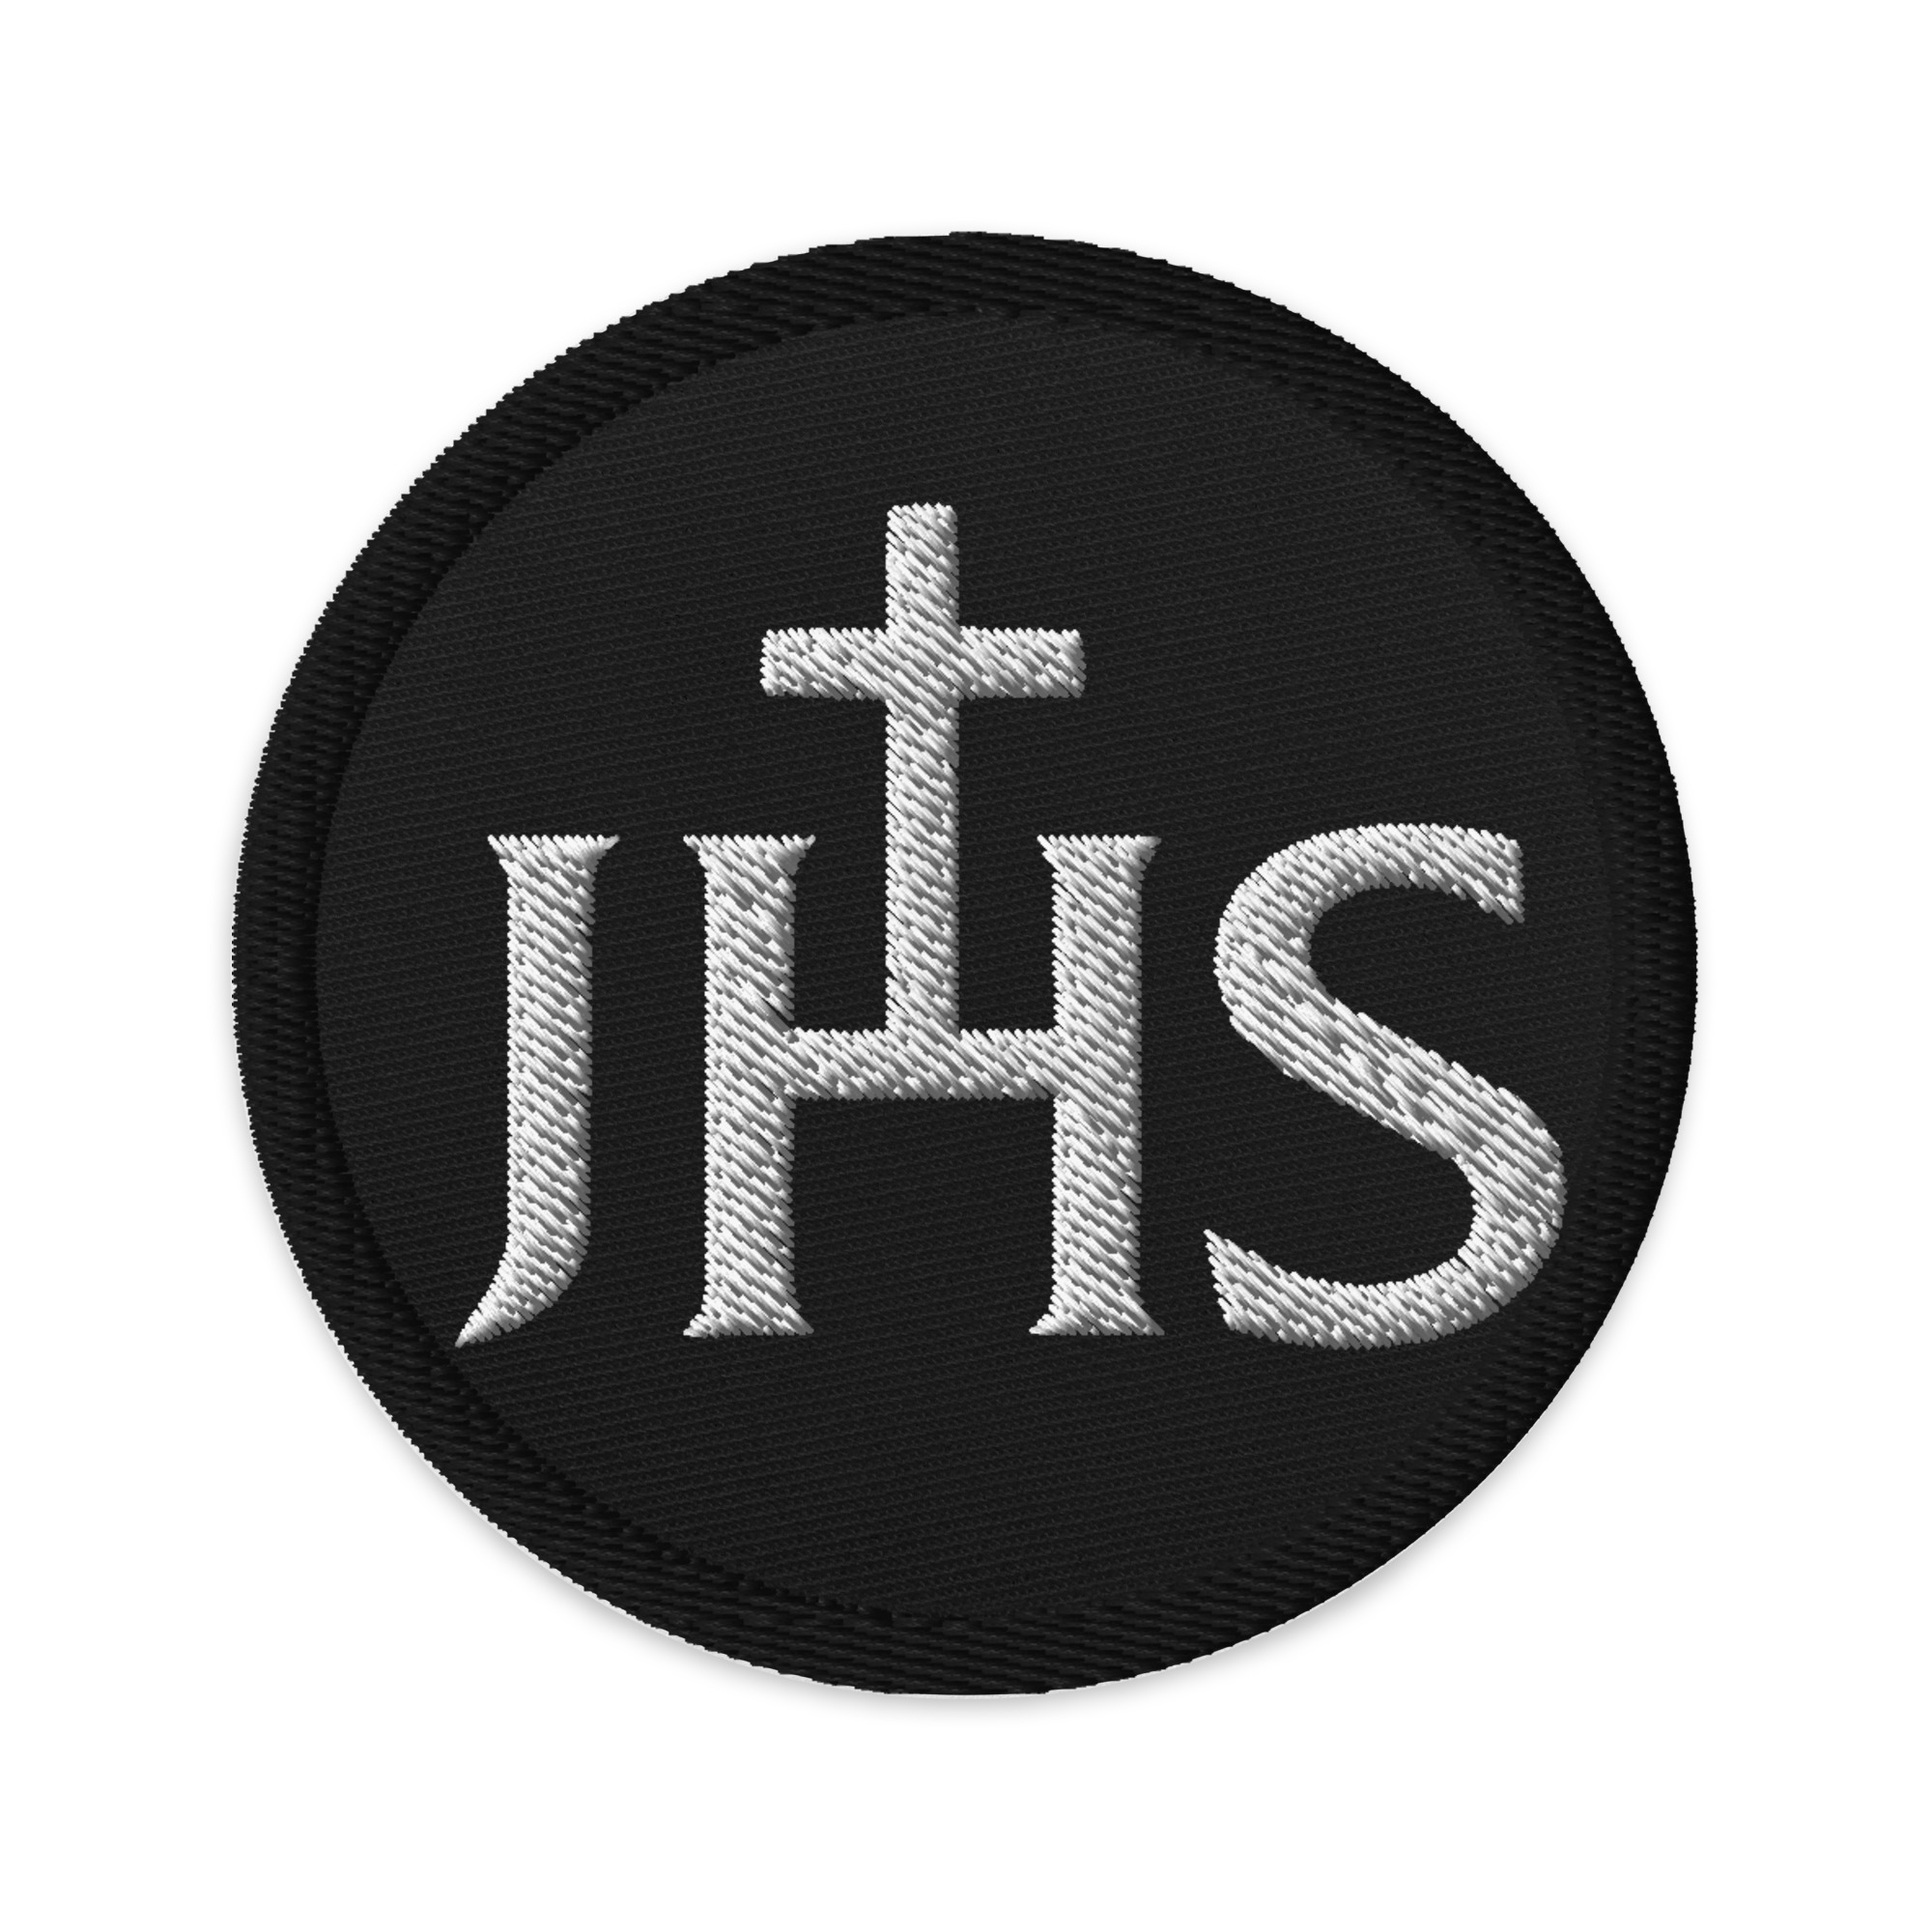 Christogram IHS white over black Embroidered patches Accessories Rosary.Team